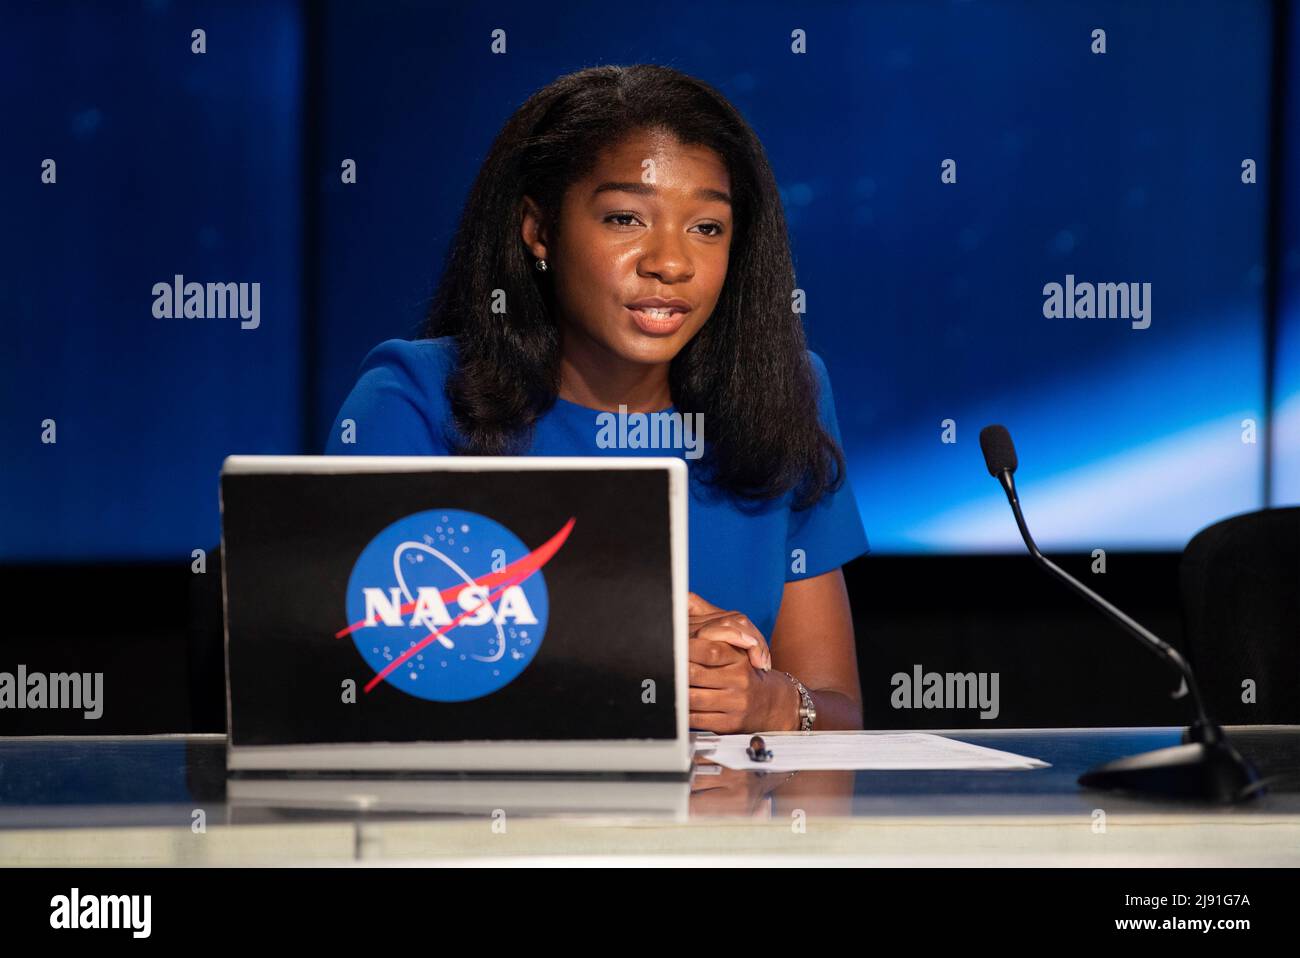 Cape Canaveral, United States of America. 18 May, 2022. Jasmine Hopkins, NASA Communications, moderates a press conference ahead of the launch of the United Launch Alliance Atlas V rocket carrying the Boeing CST-100 Starliner spacecraft aboard at the Kennedy Space Center, May 18, 2022 in Cape Canaveral, Florida. The Orbital Flight Test-2 will be second un-crewed flight test and will dock to the International Space Station and is expected to lift off May 19th. Credit: Joel Kowsky/NASA/Alamy Live News Stock Photo